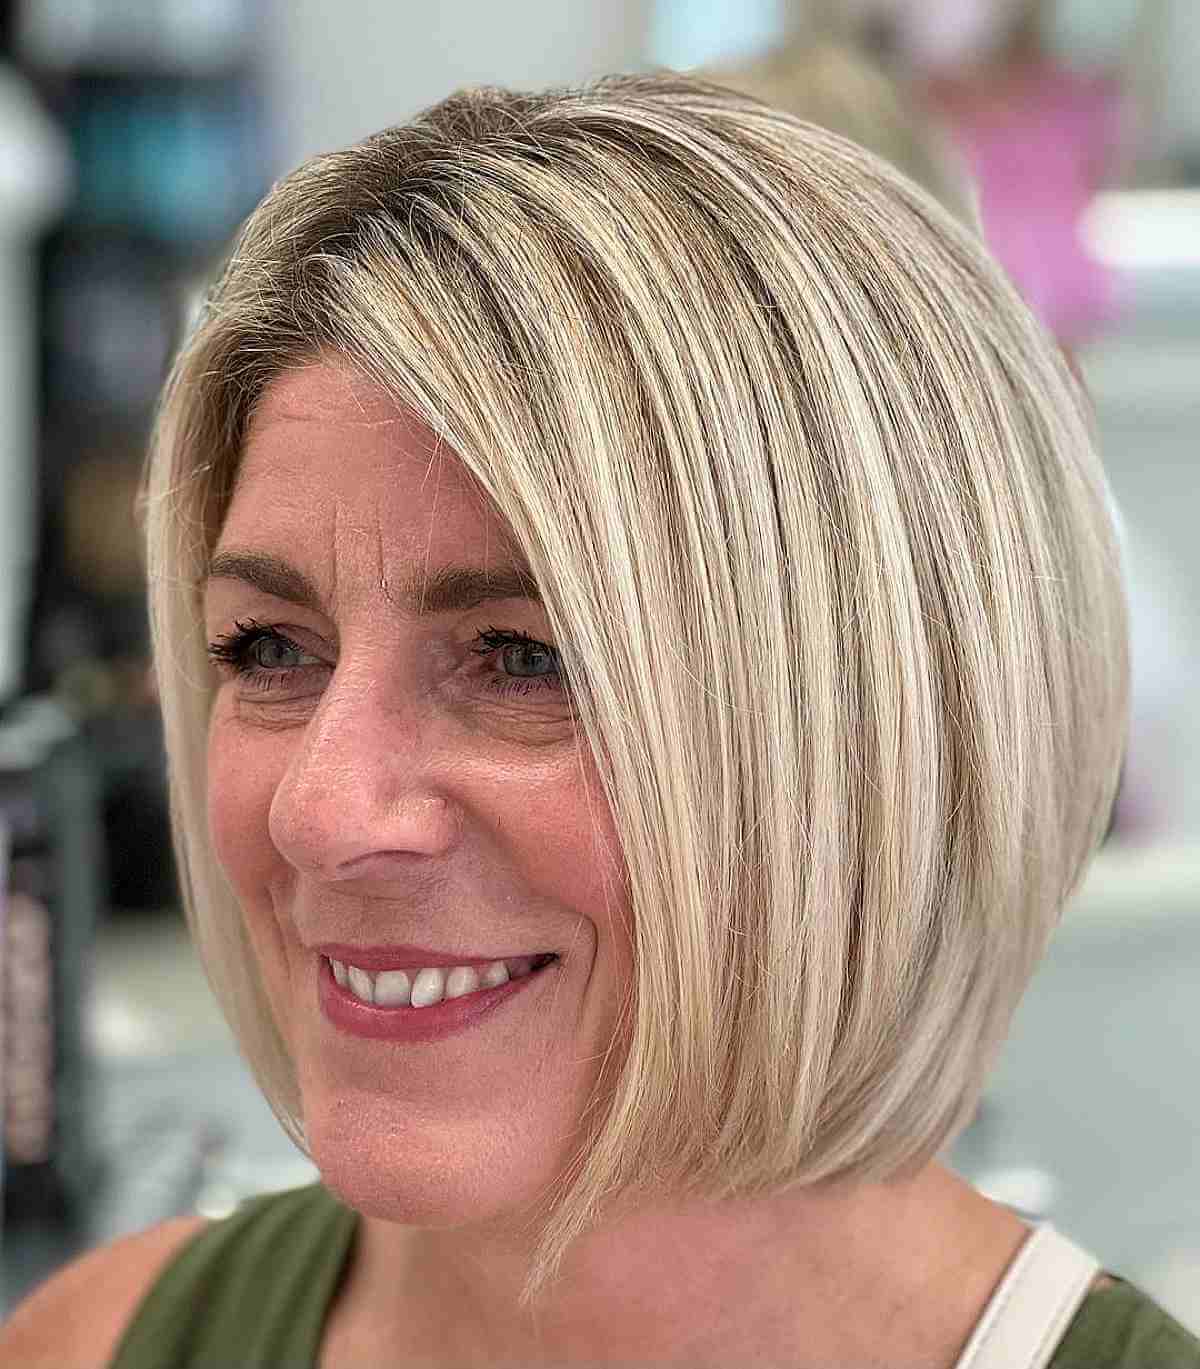 Sleek Blonde Hair with Above-the-Shoulders Cut for Older Women